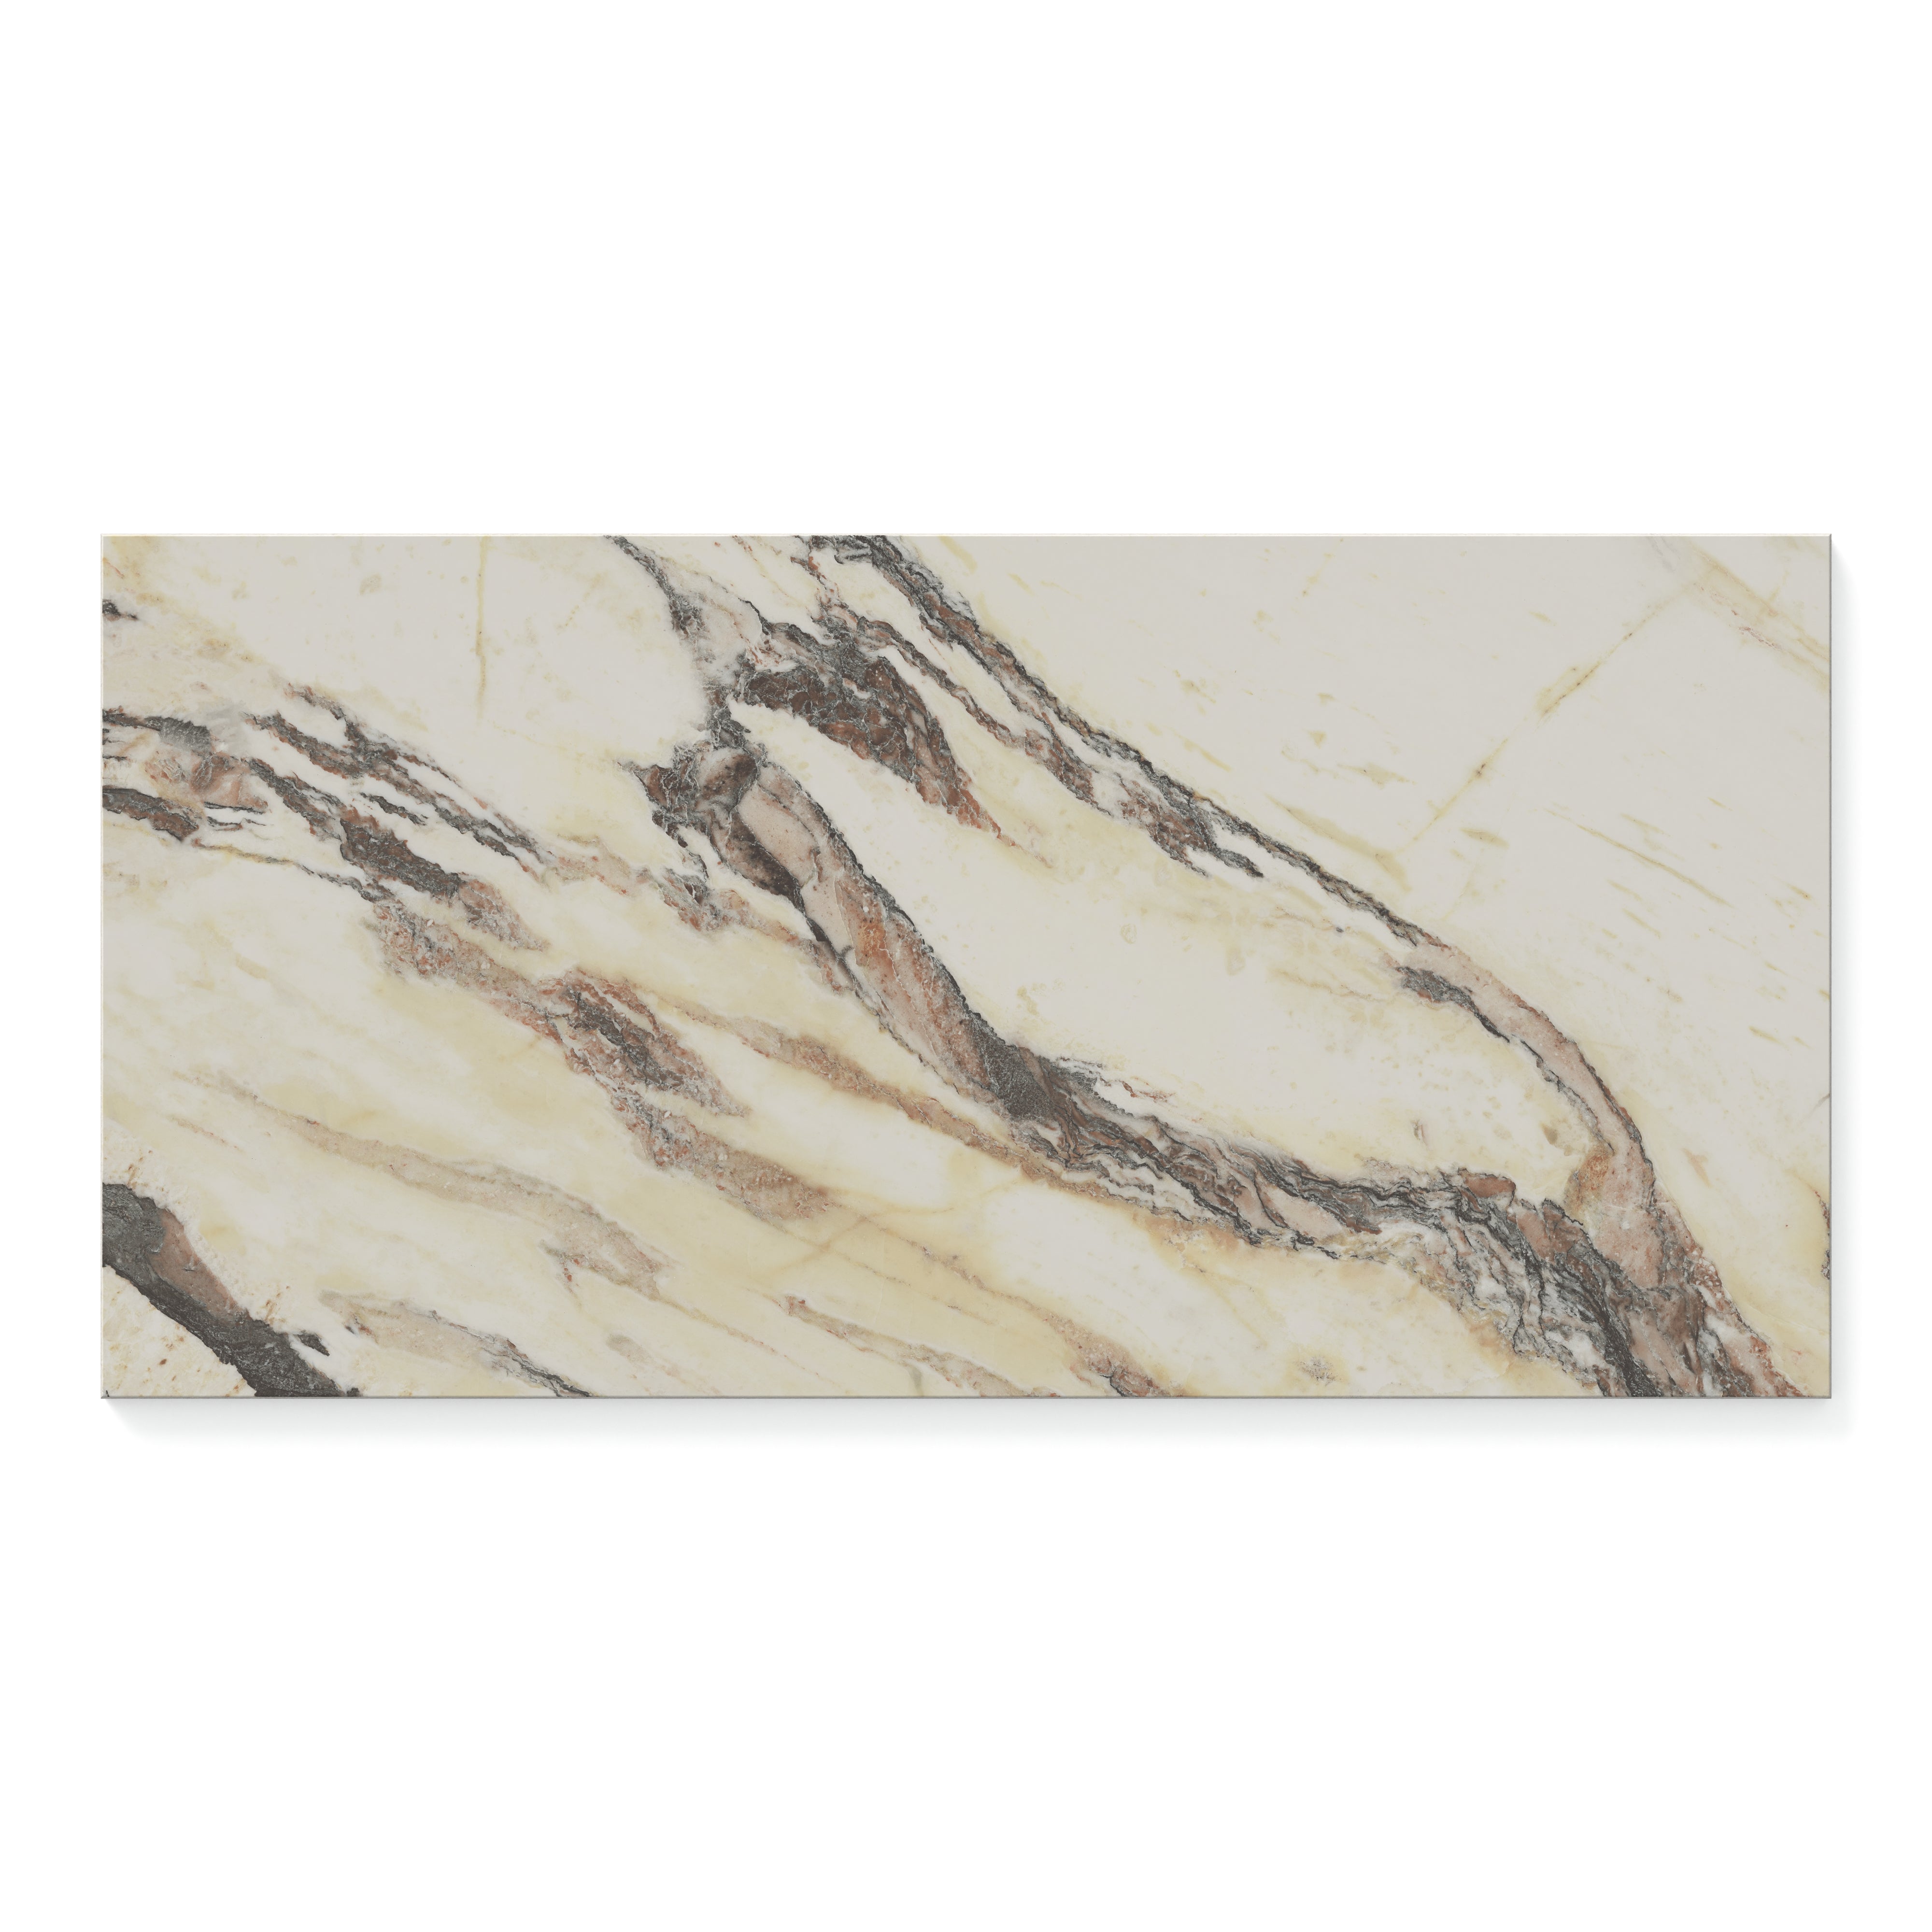 Aniston 12x24 Polished Porcelain Tile in Calacatta Viola